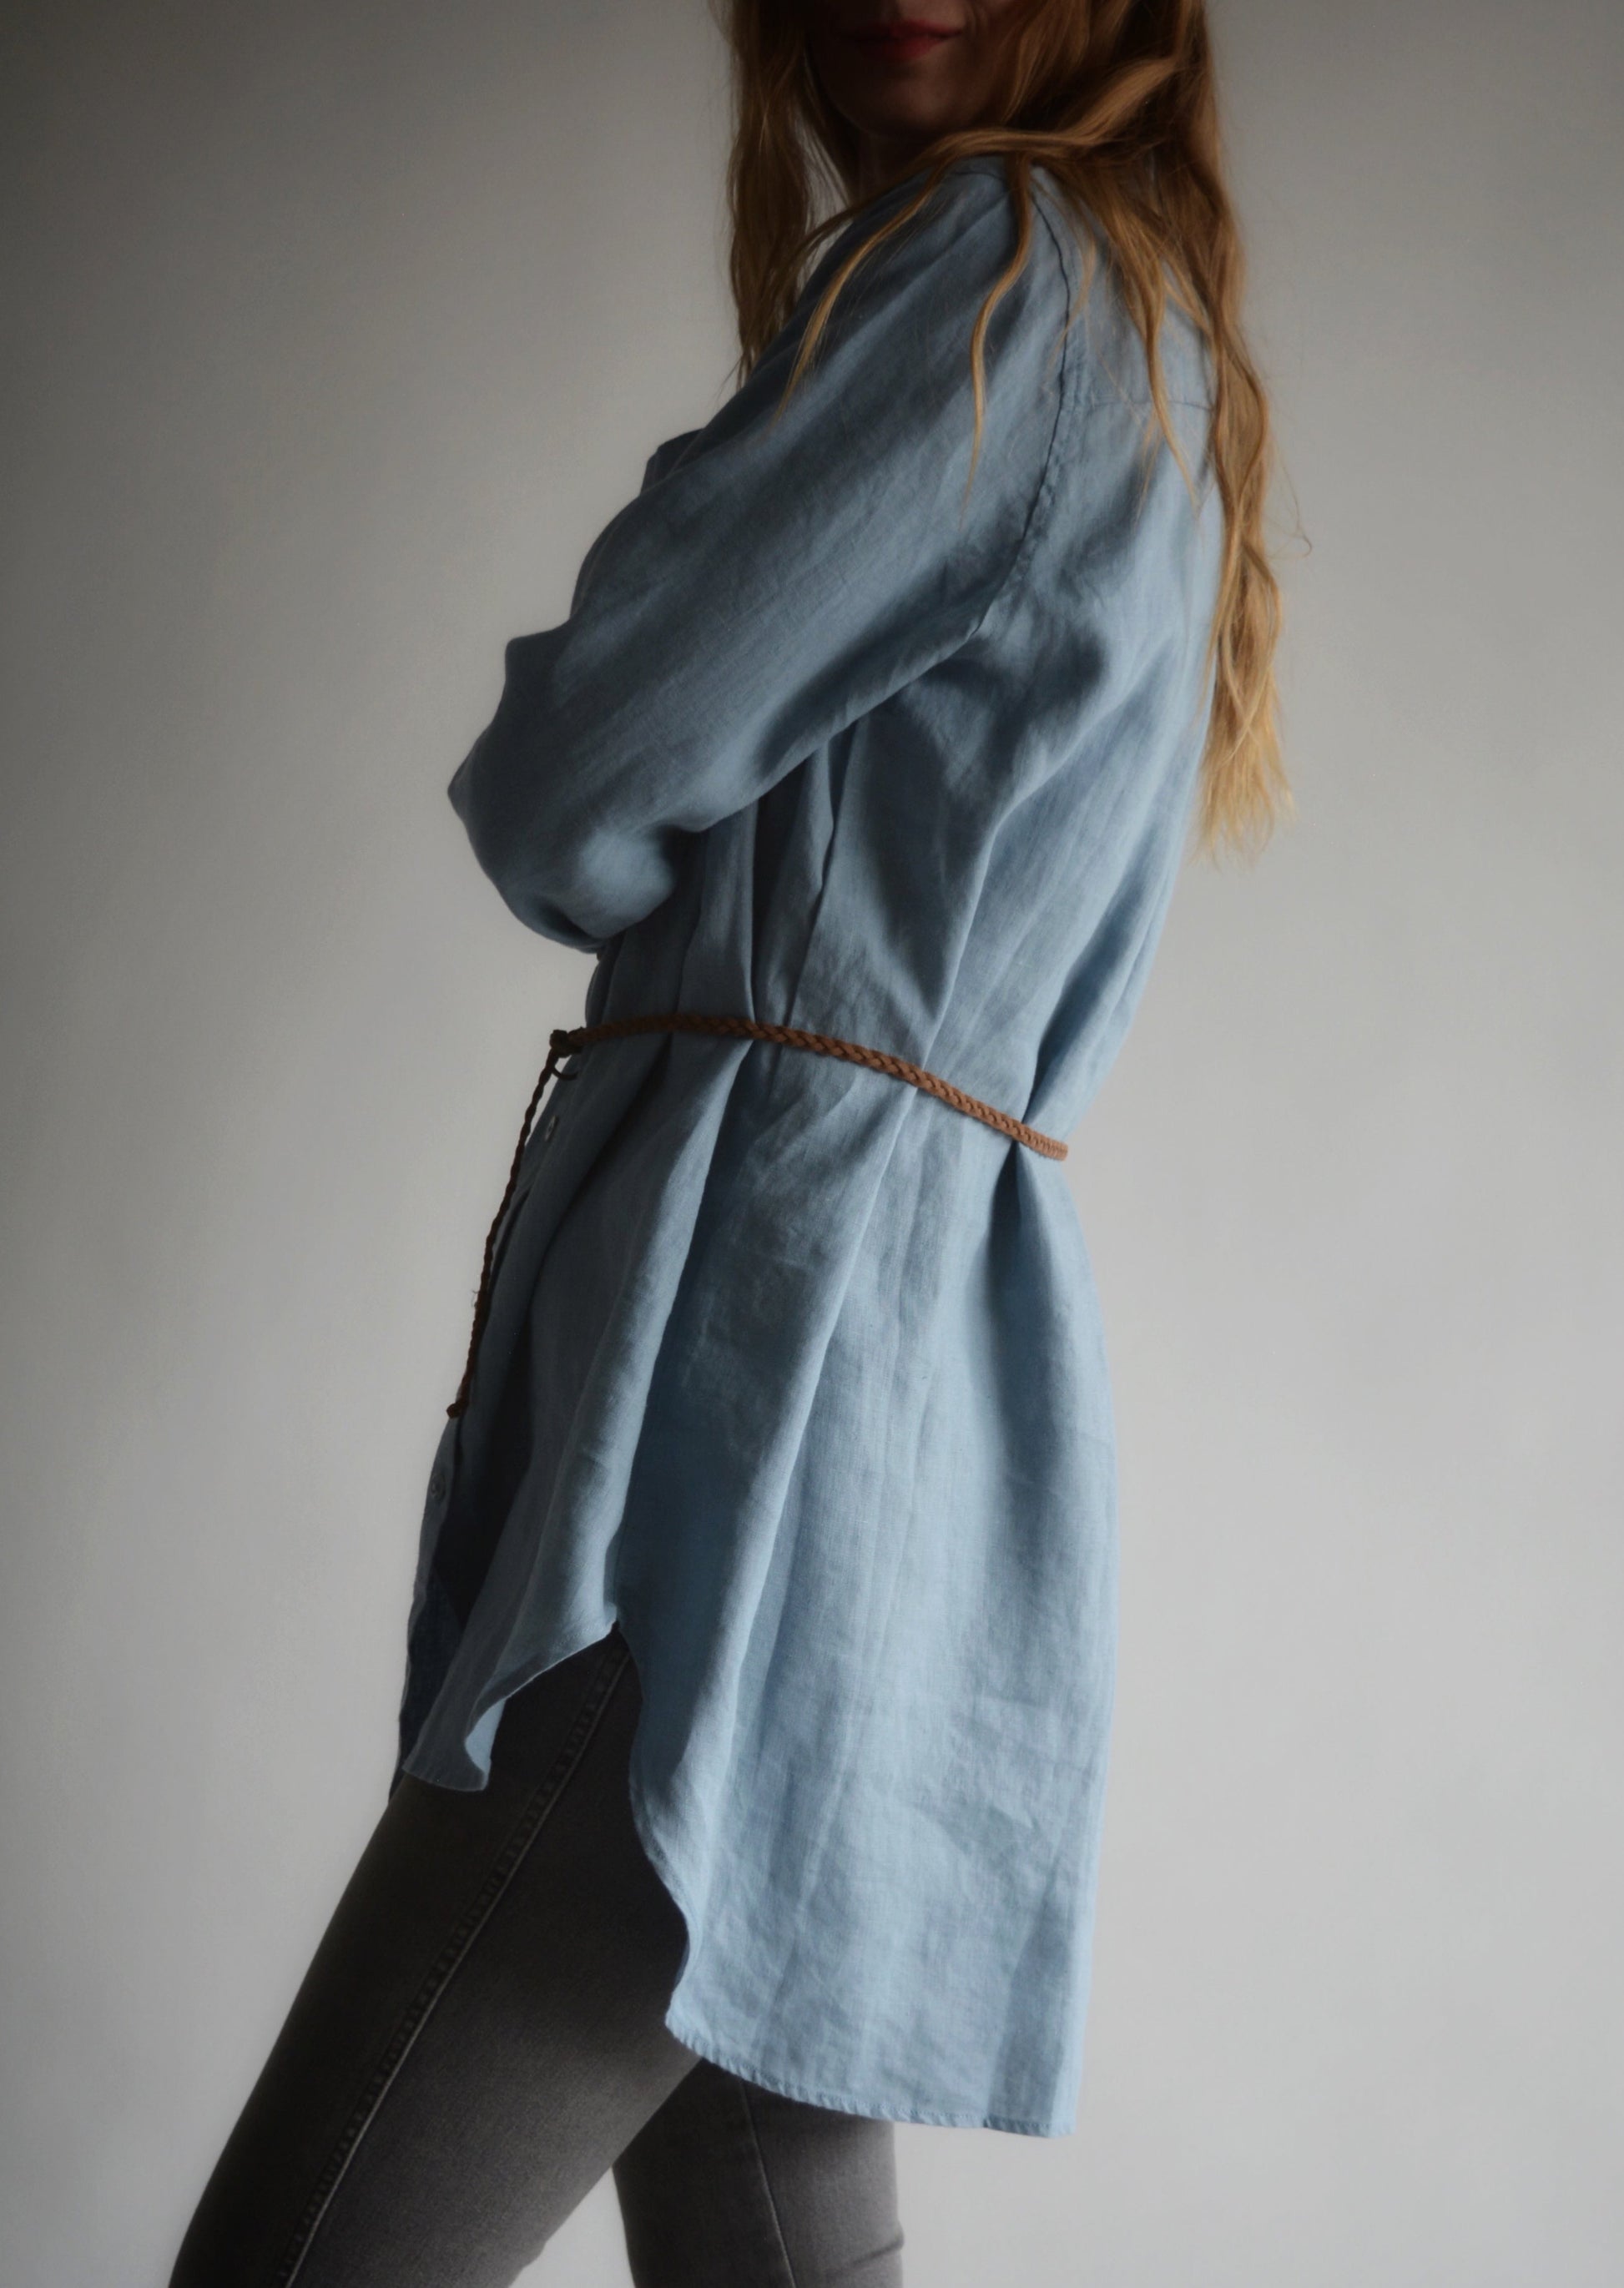 Linen Long Sleeve Shirt in Stone Blue color